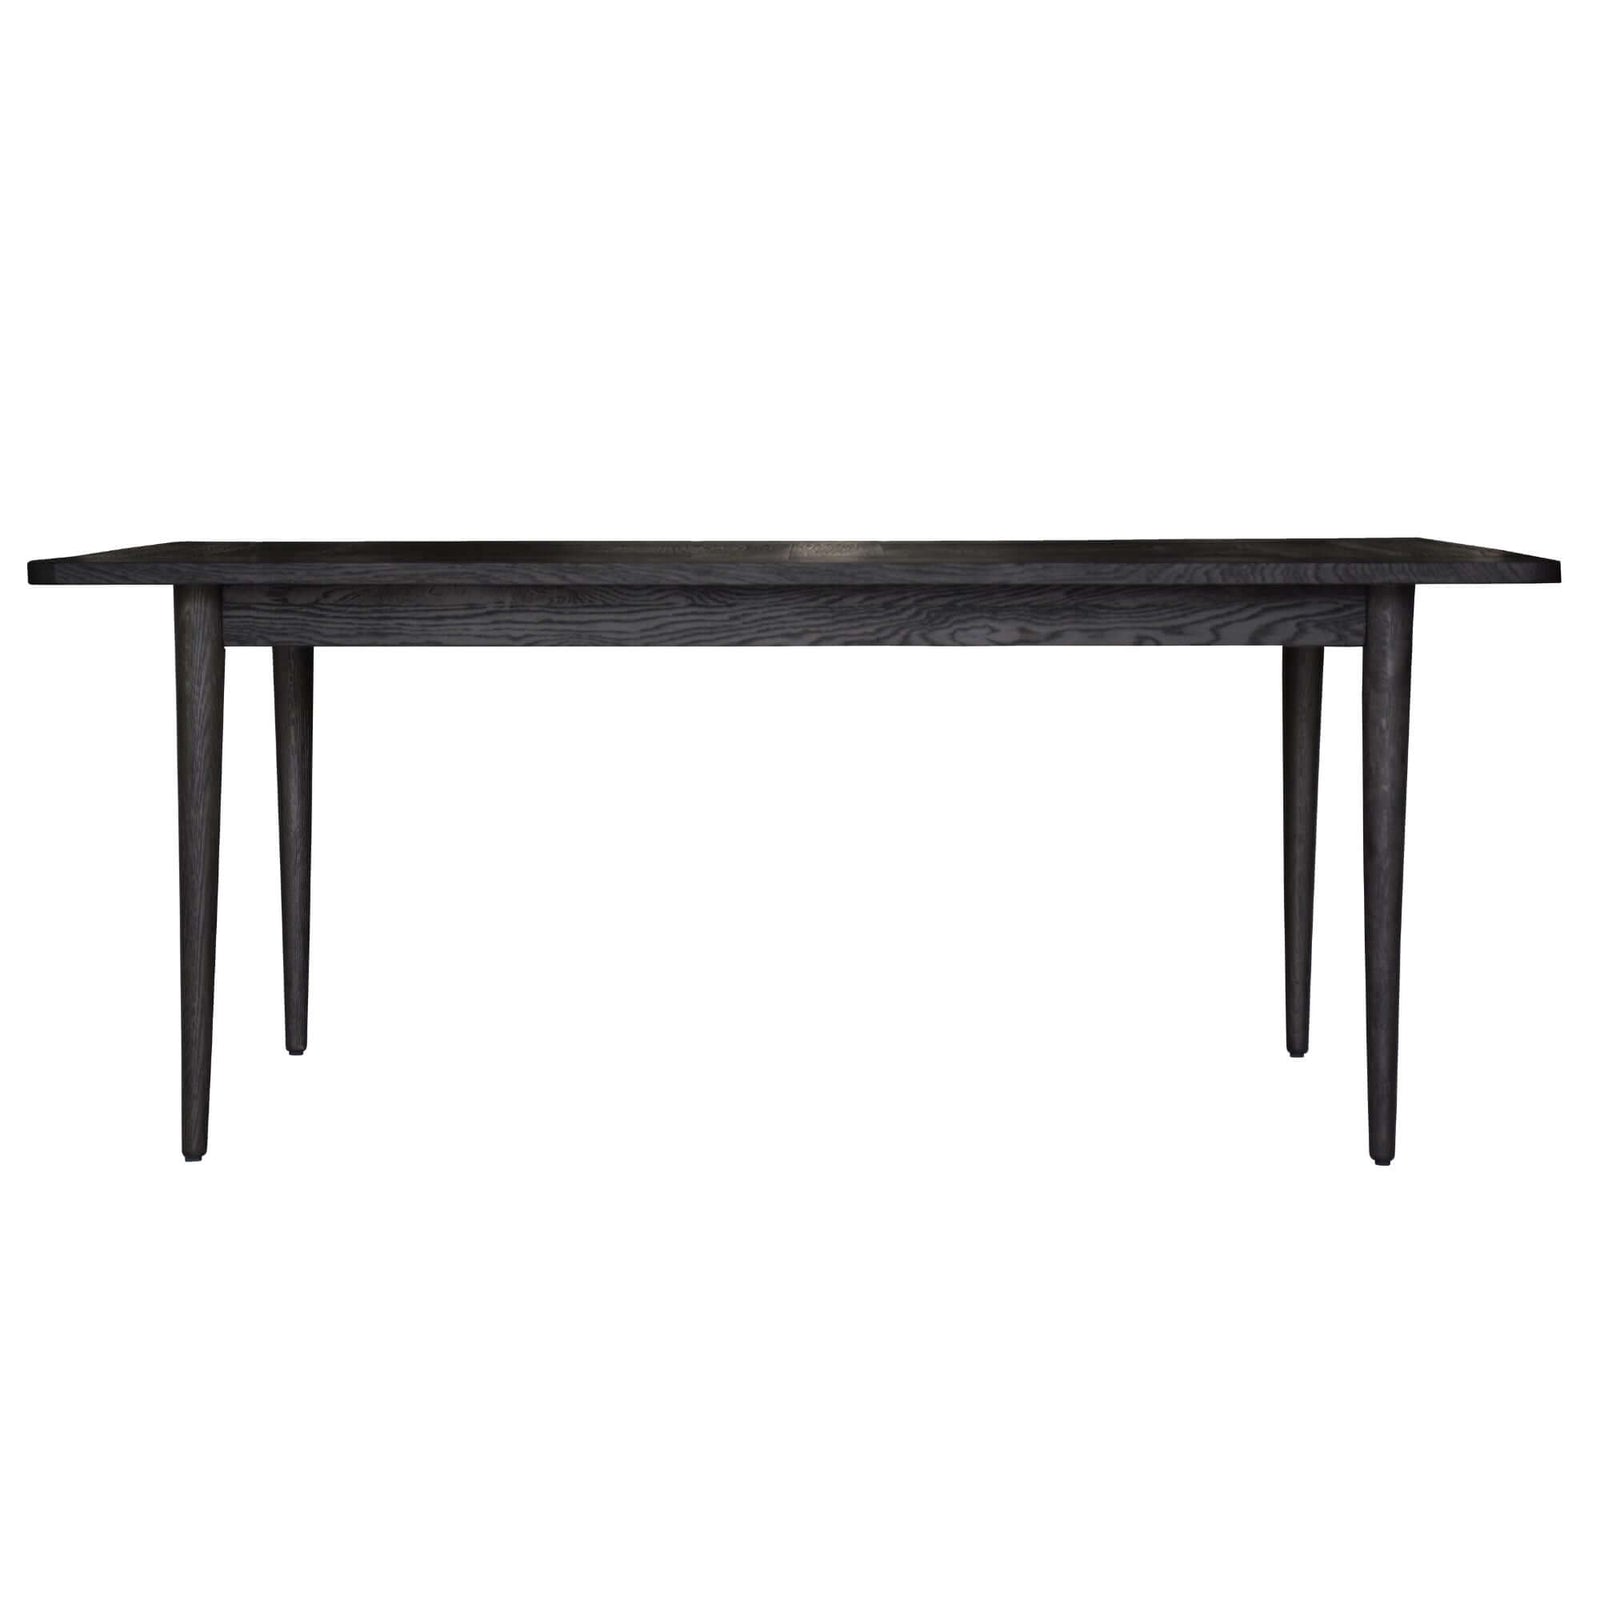 Claire Dining Table 180cm Solid Oak Wood Home Dinner Furniture - Black-Upinteriors